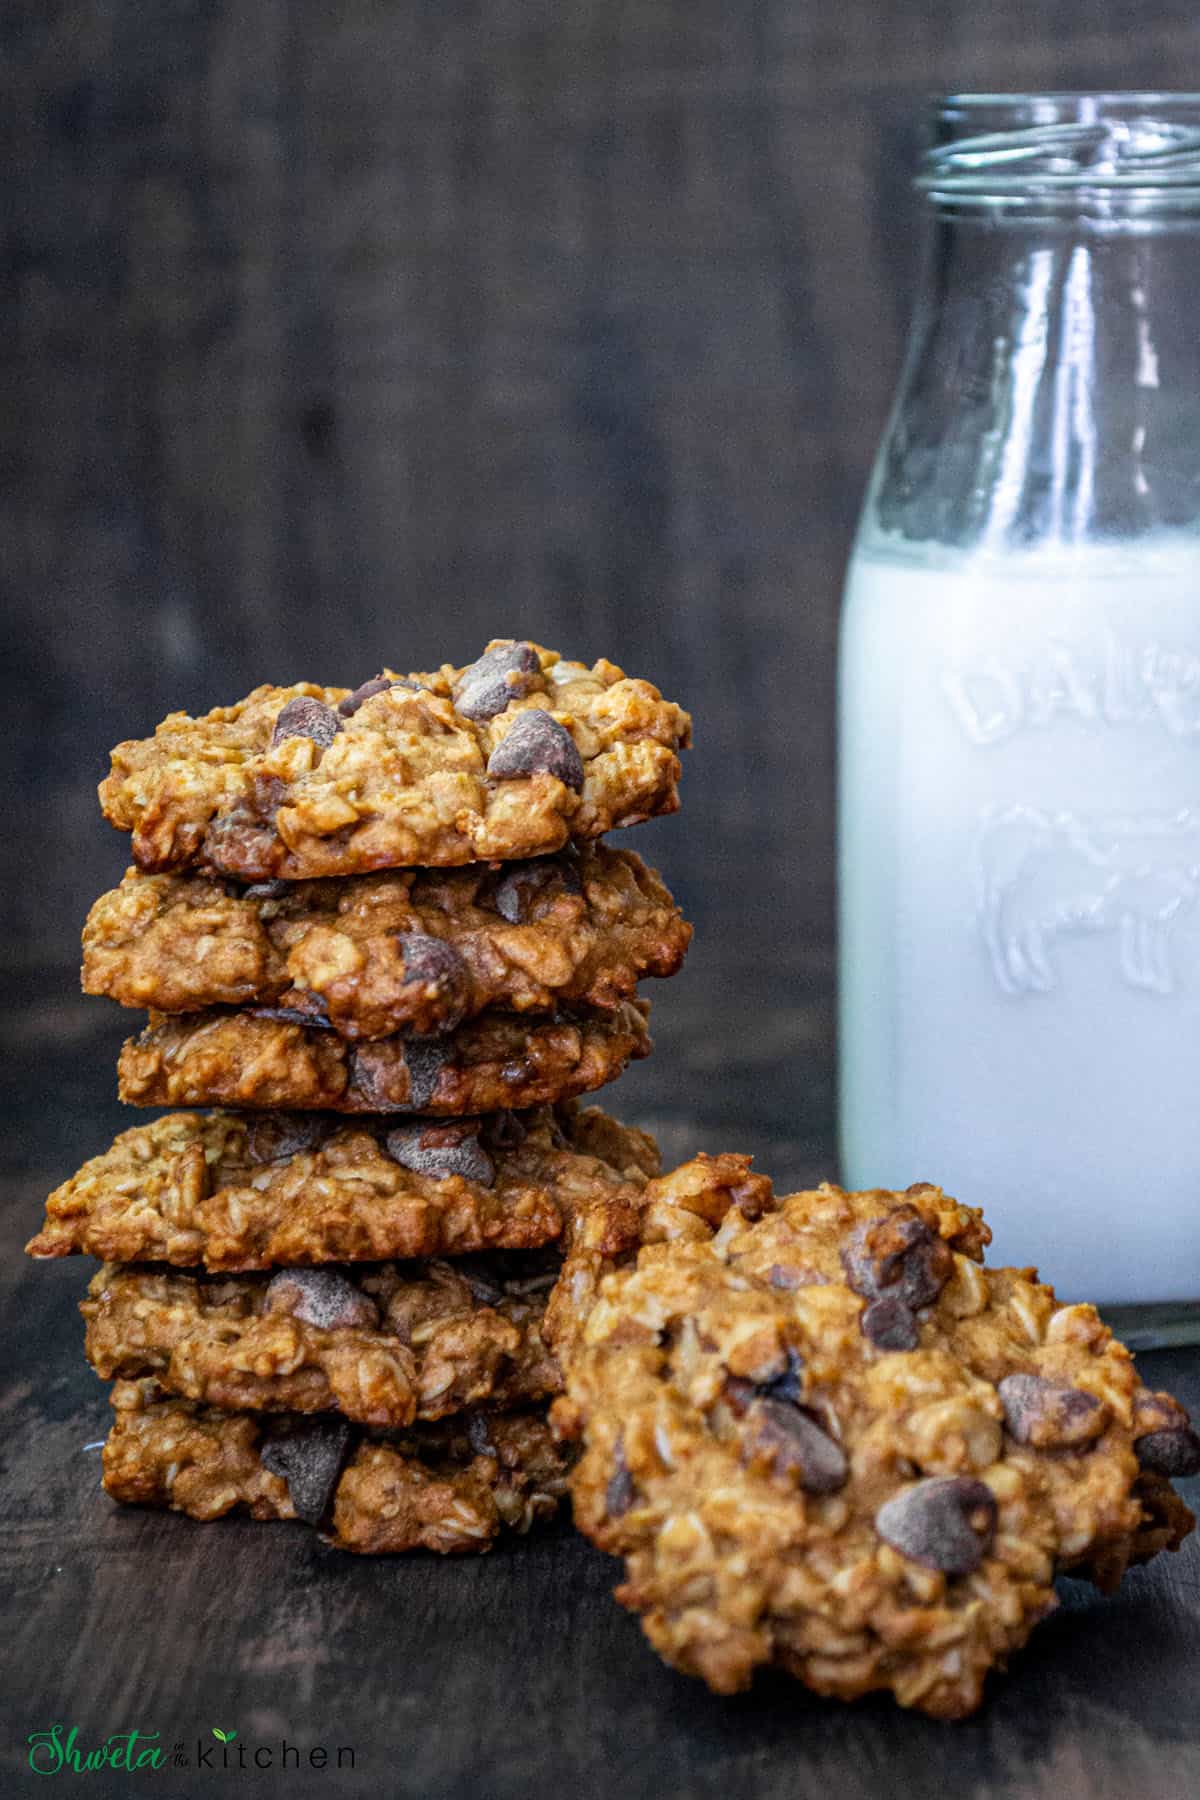 A stack of chocolate oatmeal cookies in front of a bottle of milk